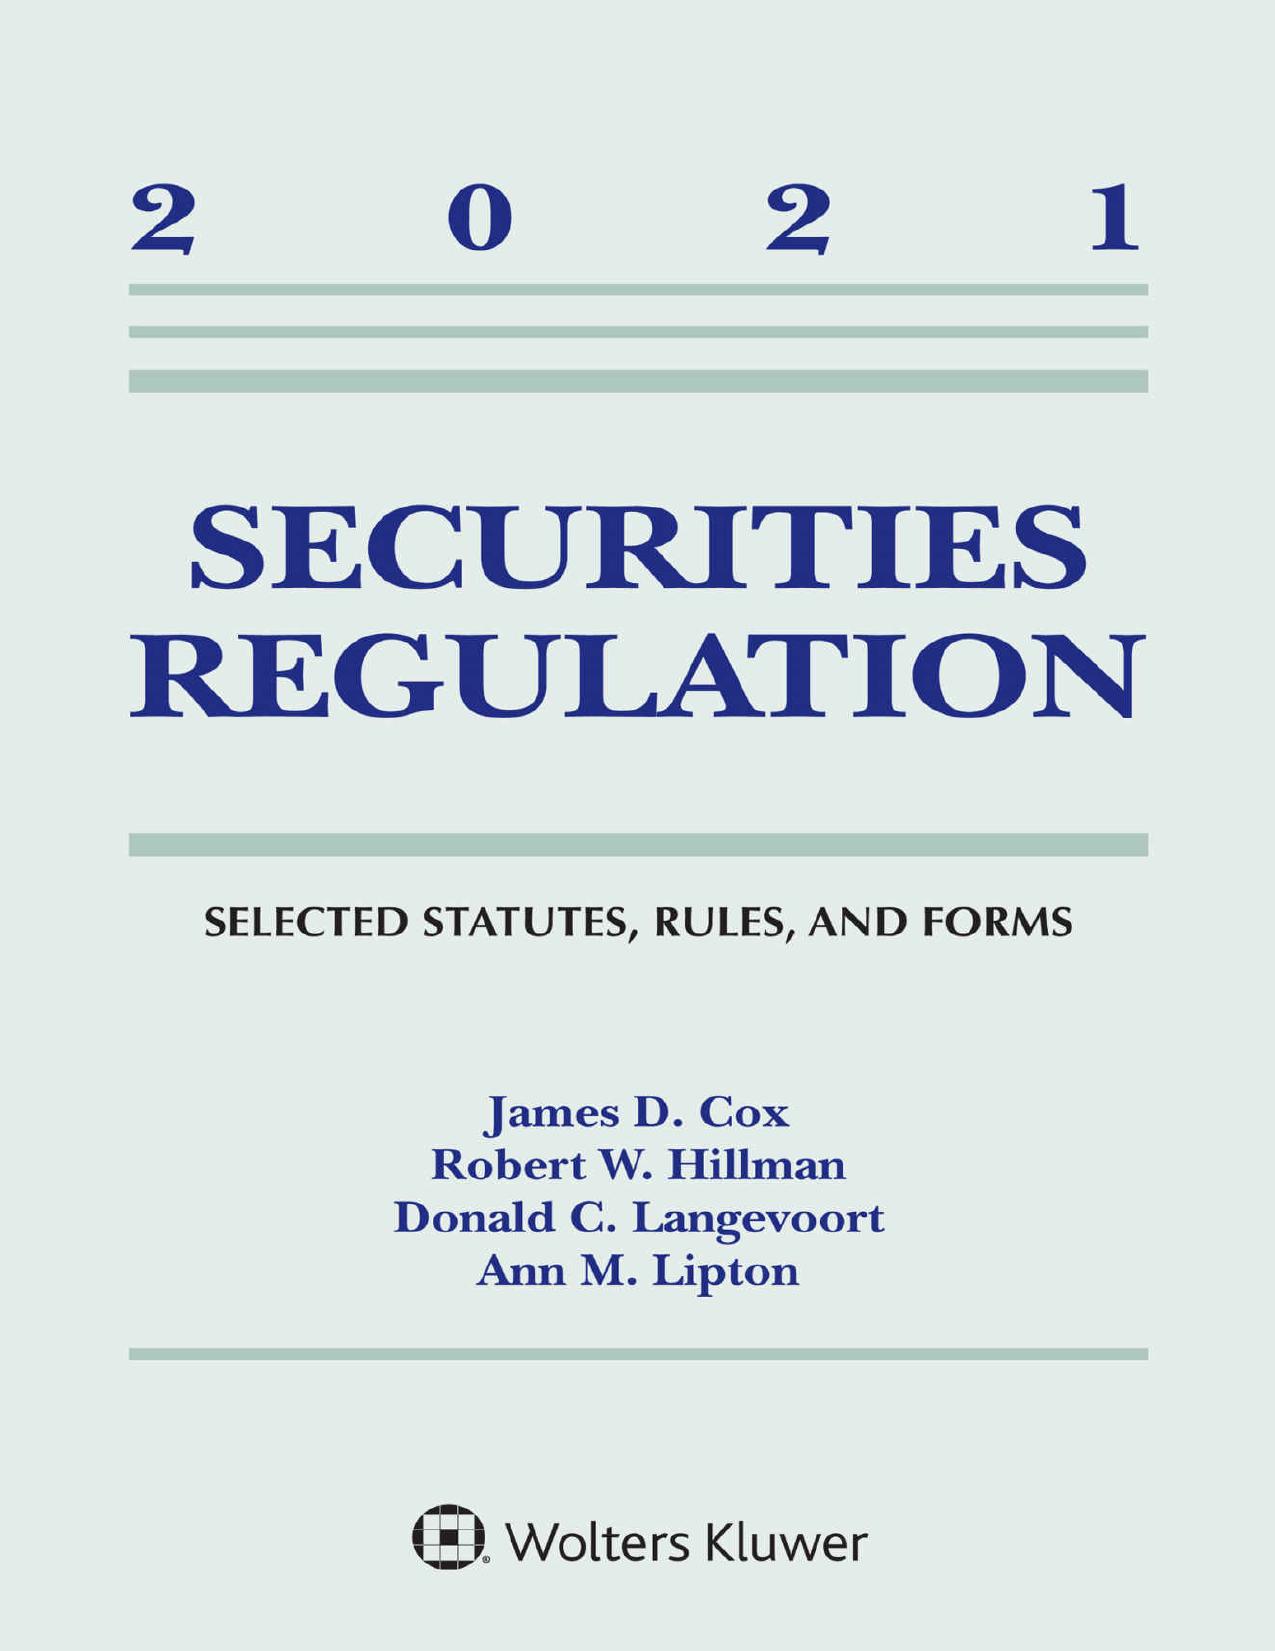 Securities Regulation_ Selected Statutes, Rules, and Forms, 2021 Edition )  by James D. Cox  , Donald C. Langevoort